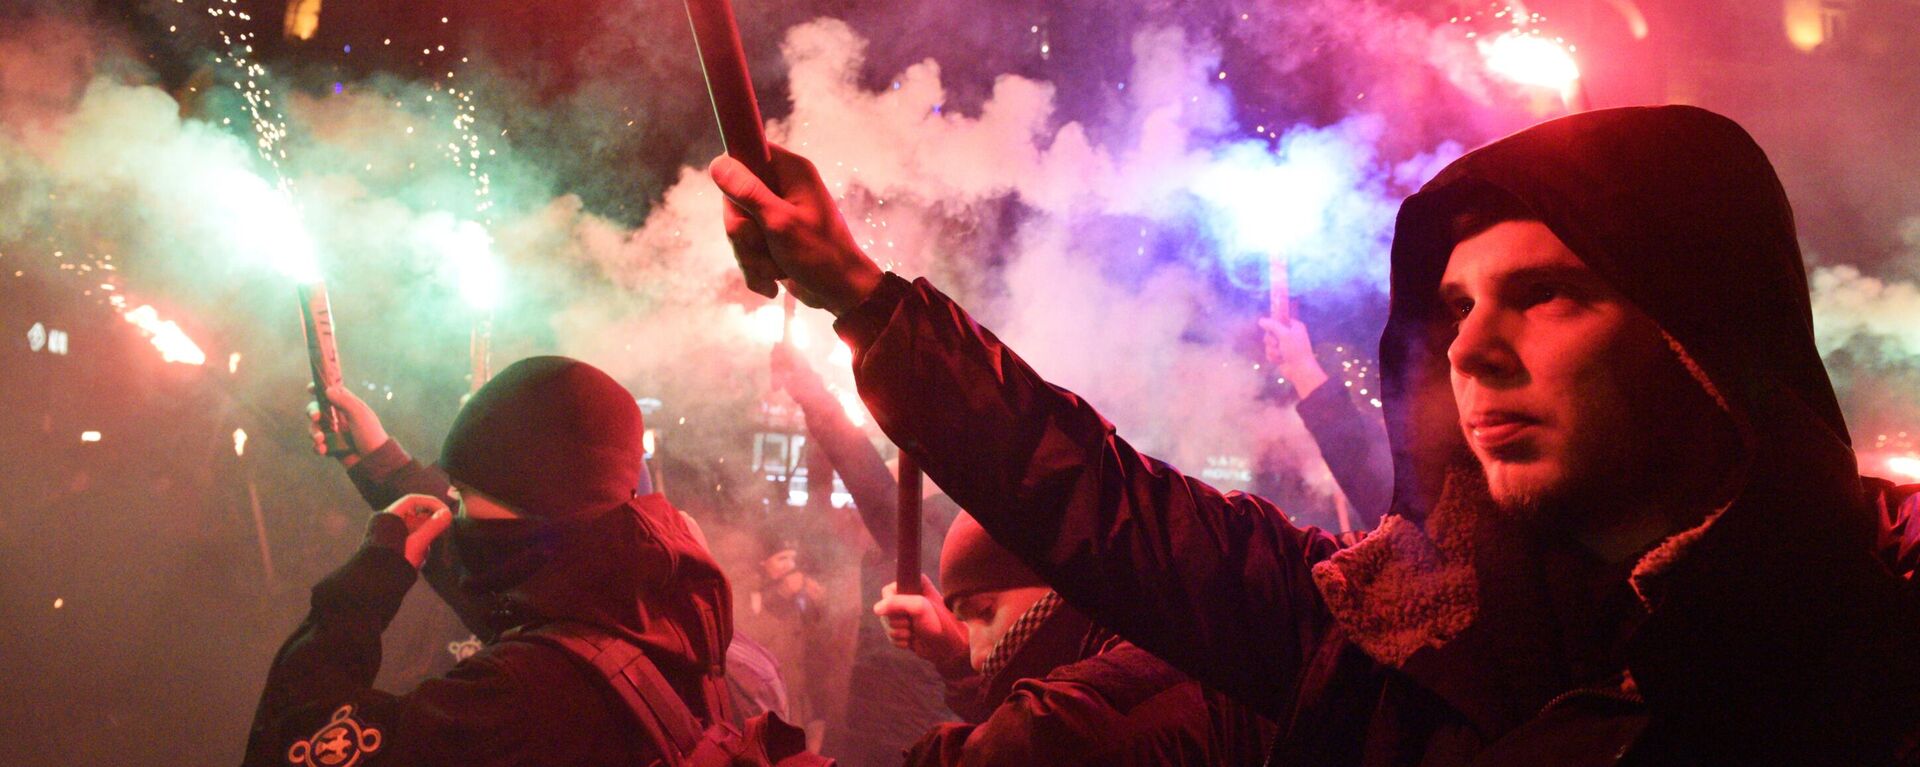 Activists of Ukrainian nationalist parties fire flares as they take part in a rally to mark the 110th anniversary of the birth of Stepan Bandera, one of the founders of the Organization of Ukrainian Nationalists (OUN), in Kiev, Ukraine. - Sputnik International, 1920, 11.04.2022